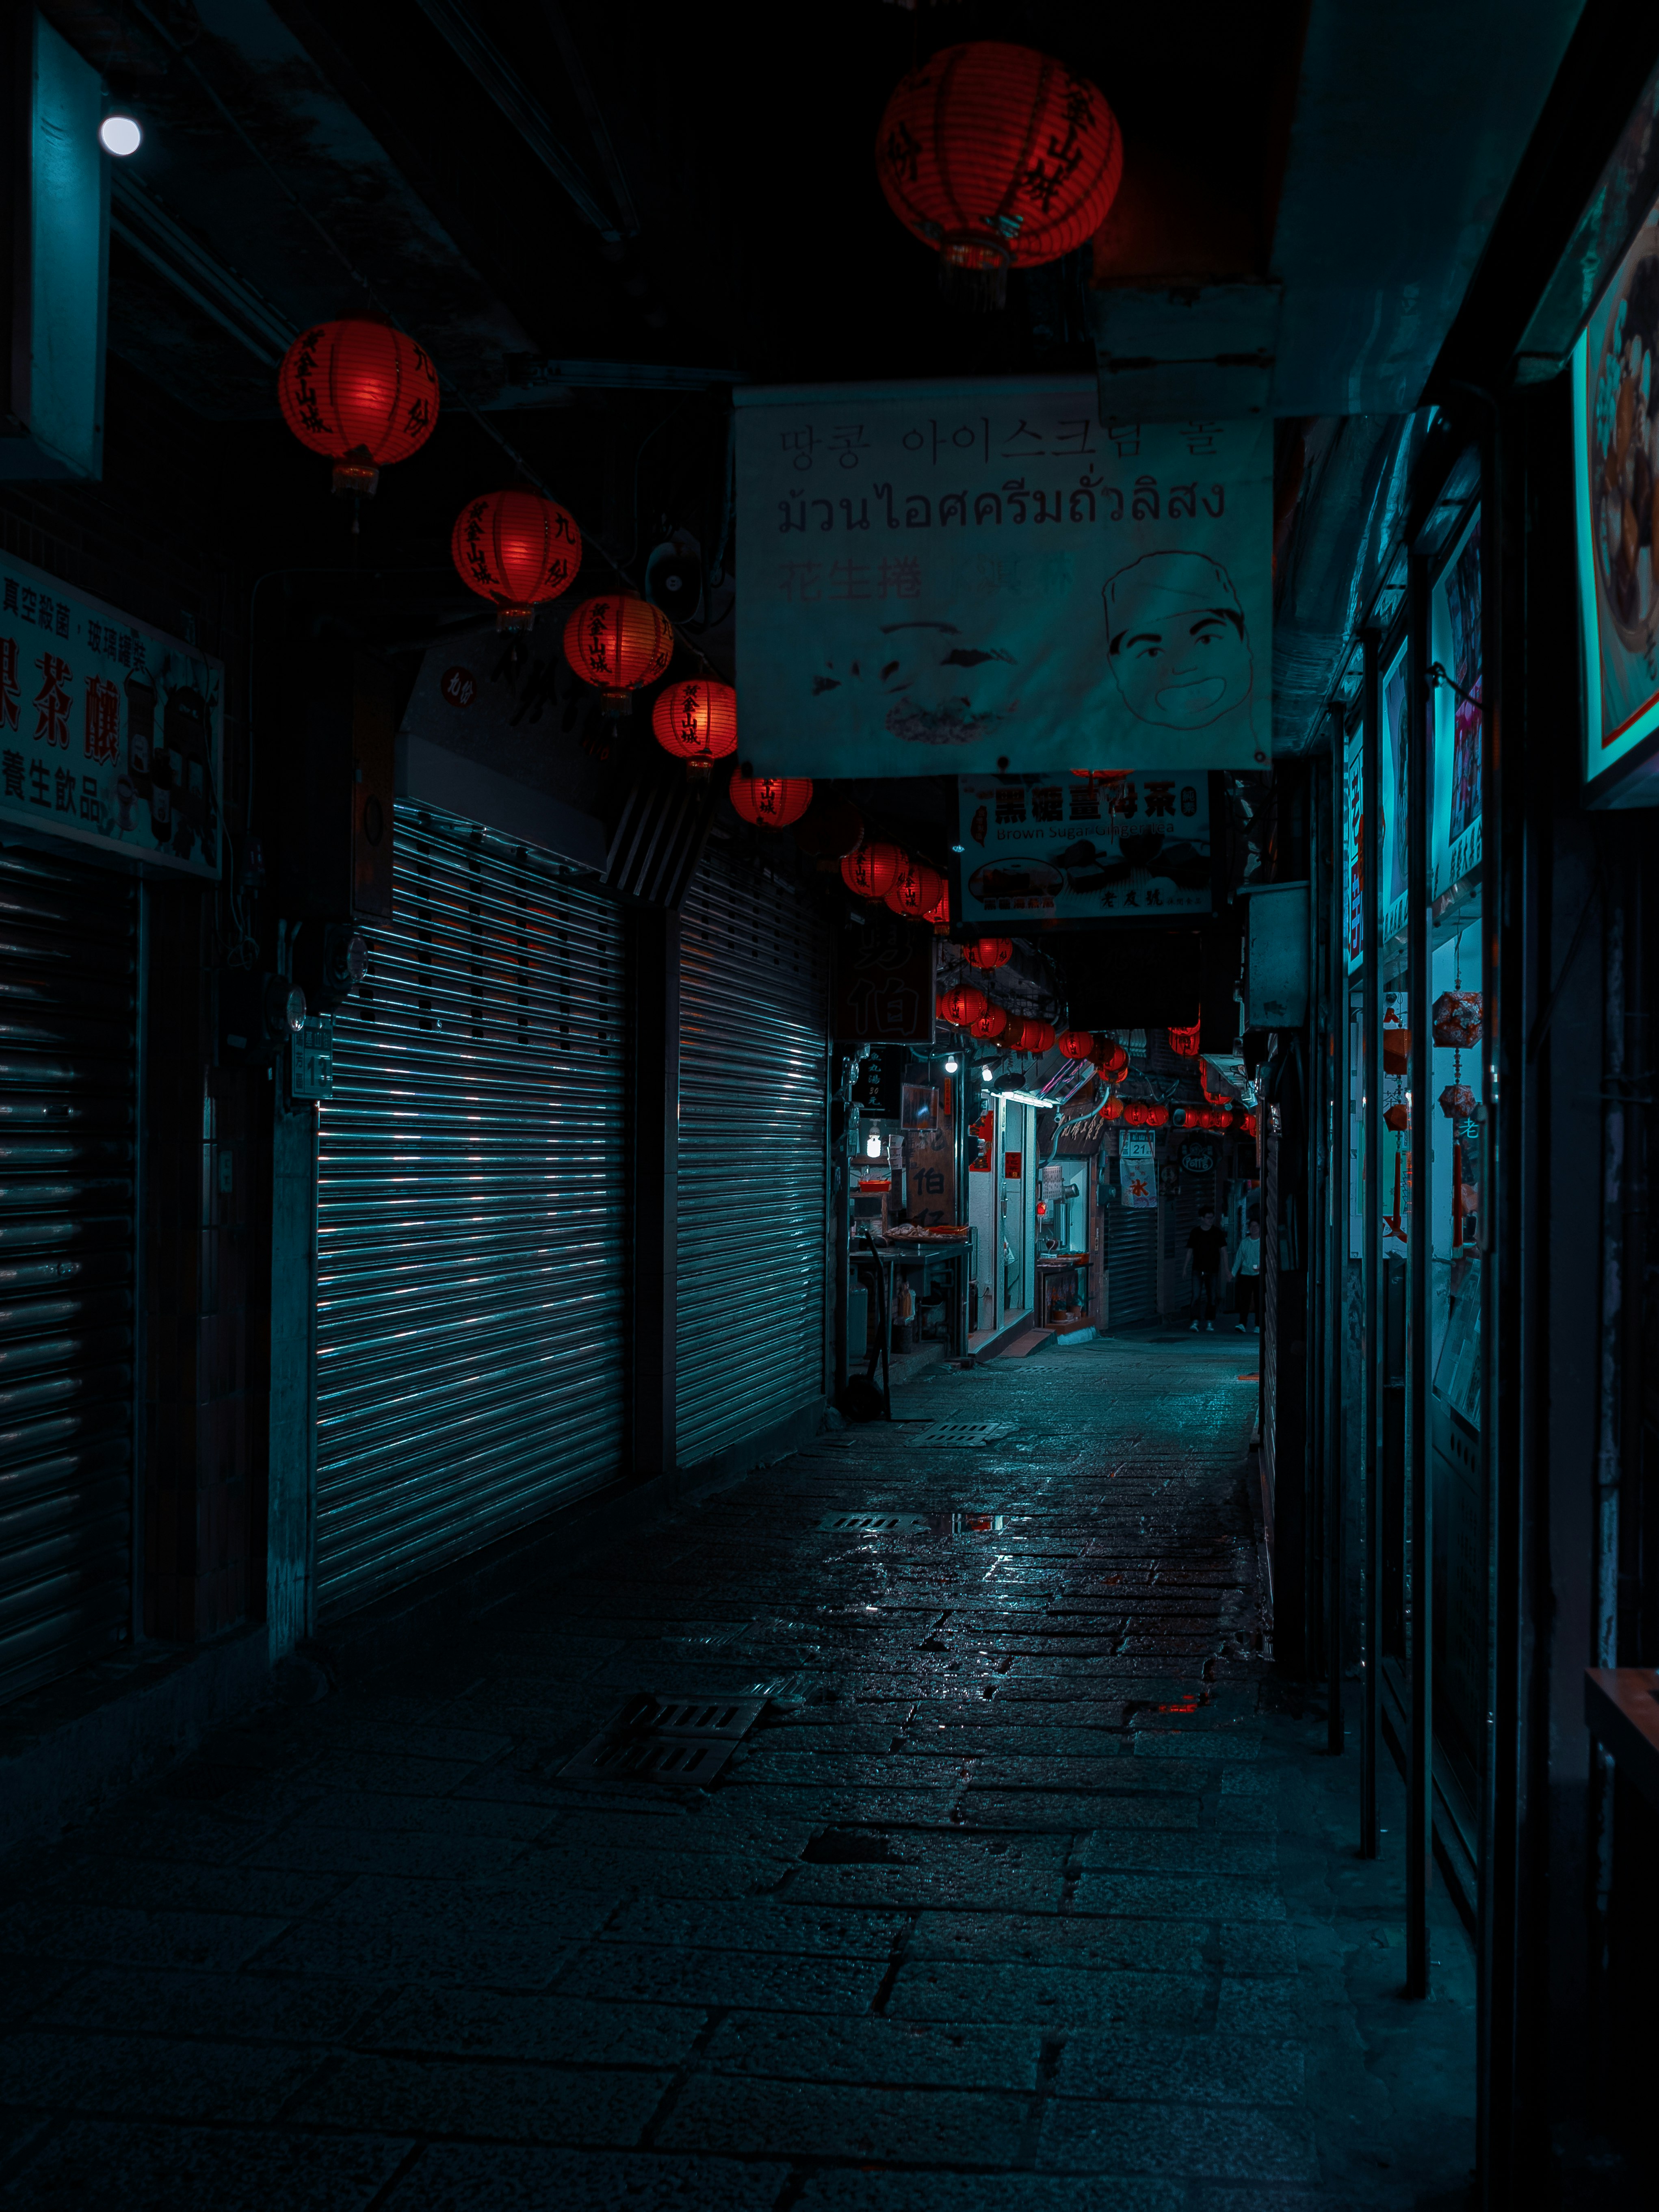 Commercial back alley by night